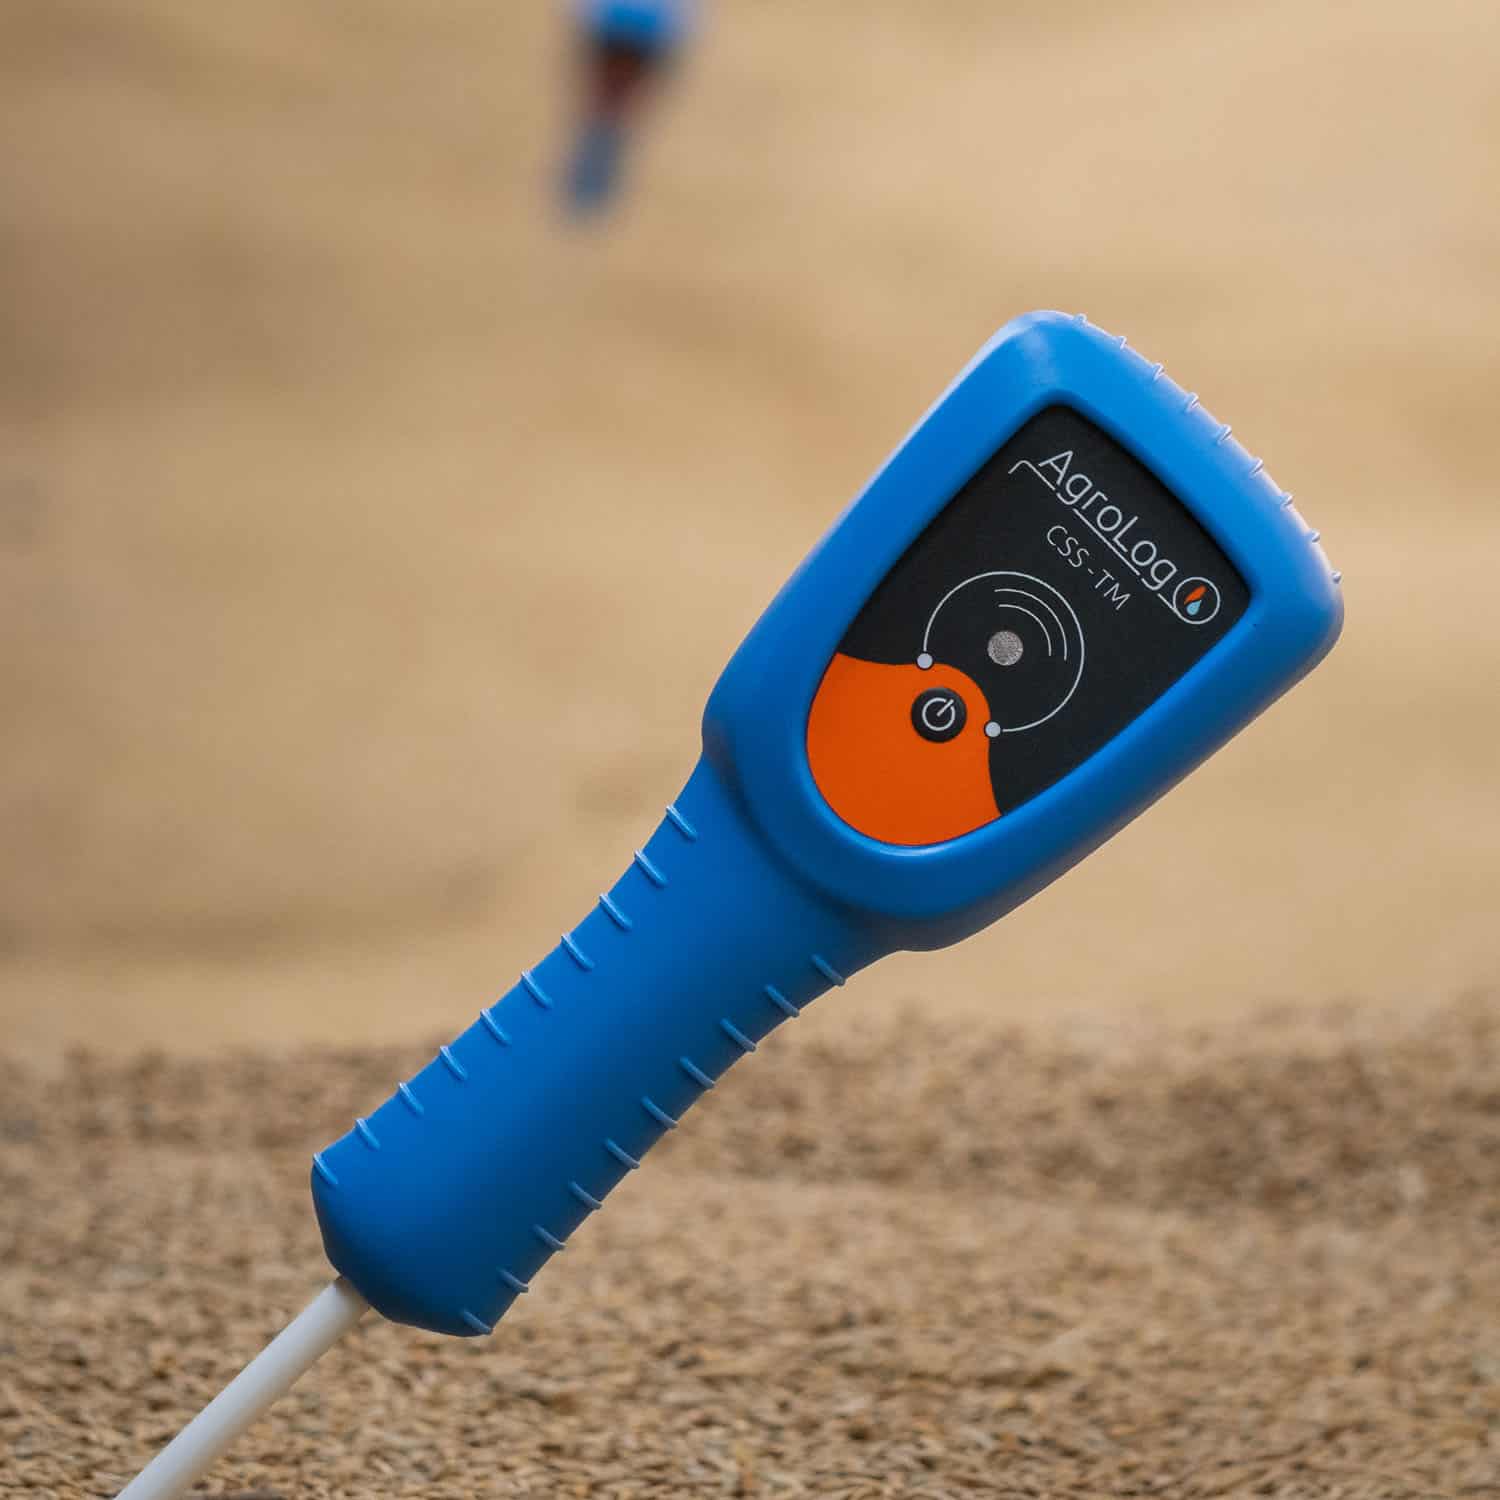 The AgroLog wireless temperature and moisture probe wirelessly transmits grain temperatures to the user.